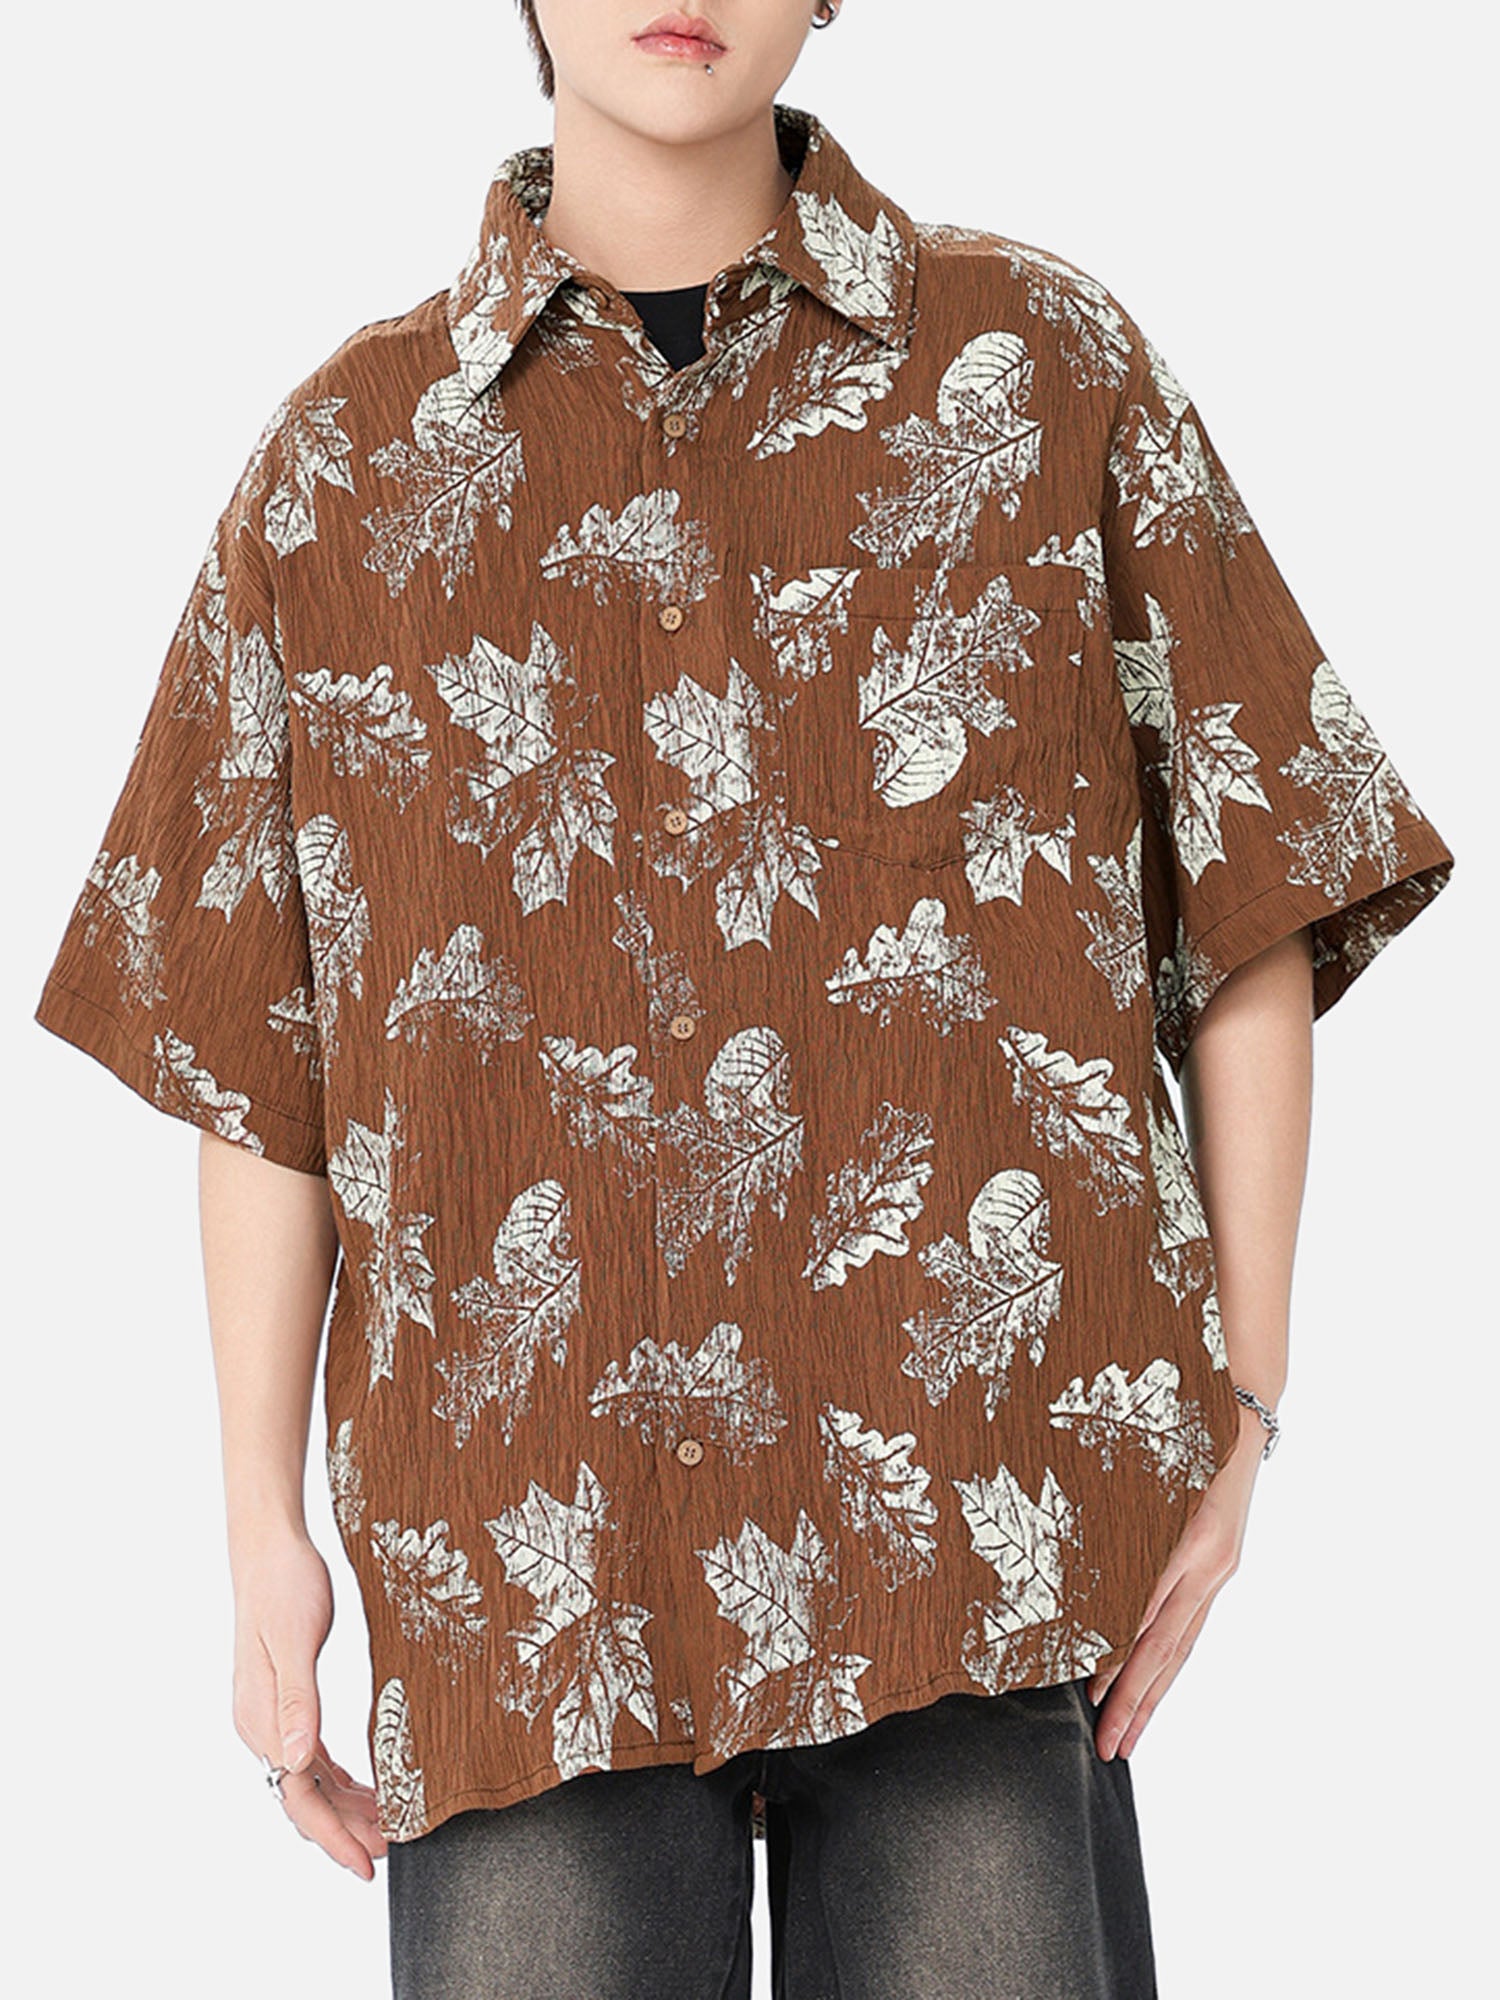 Thesupermade Vintage Floral All Over Print Short Sleeve Shirt